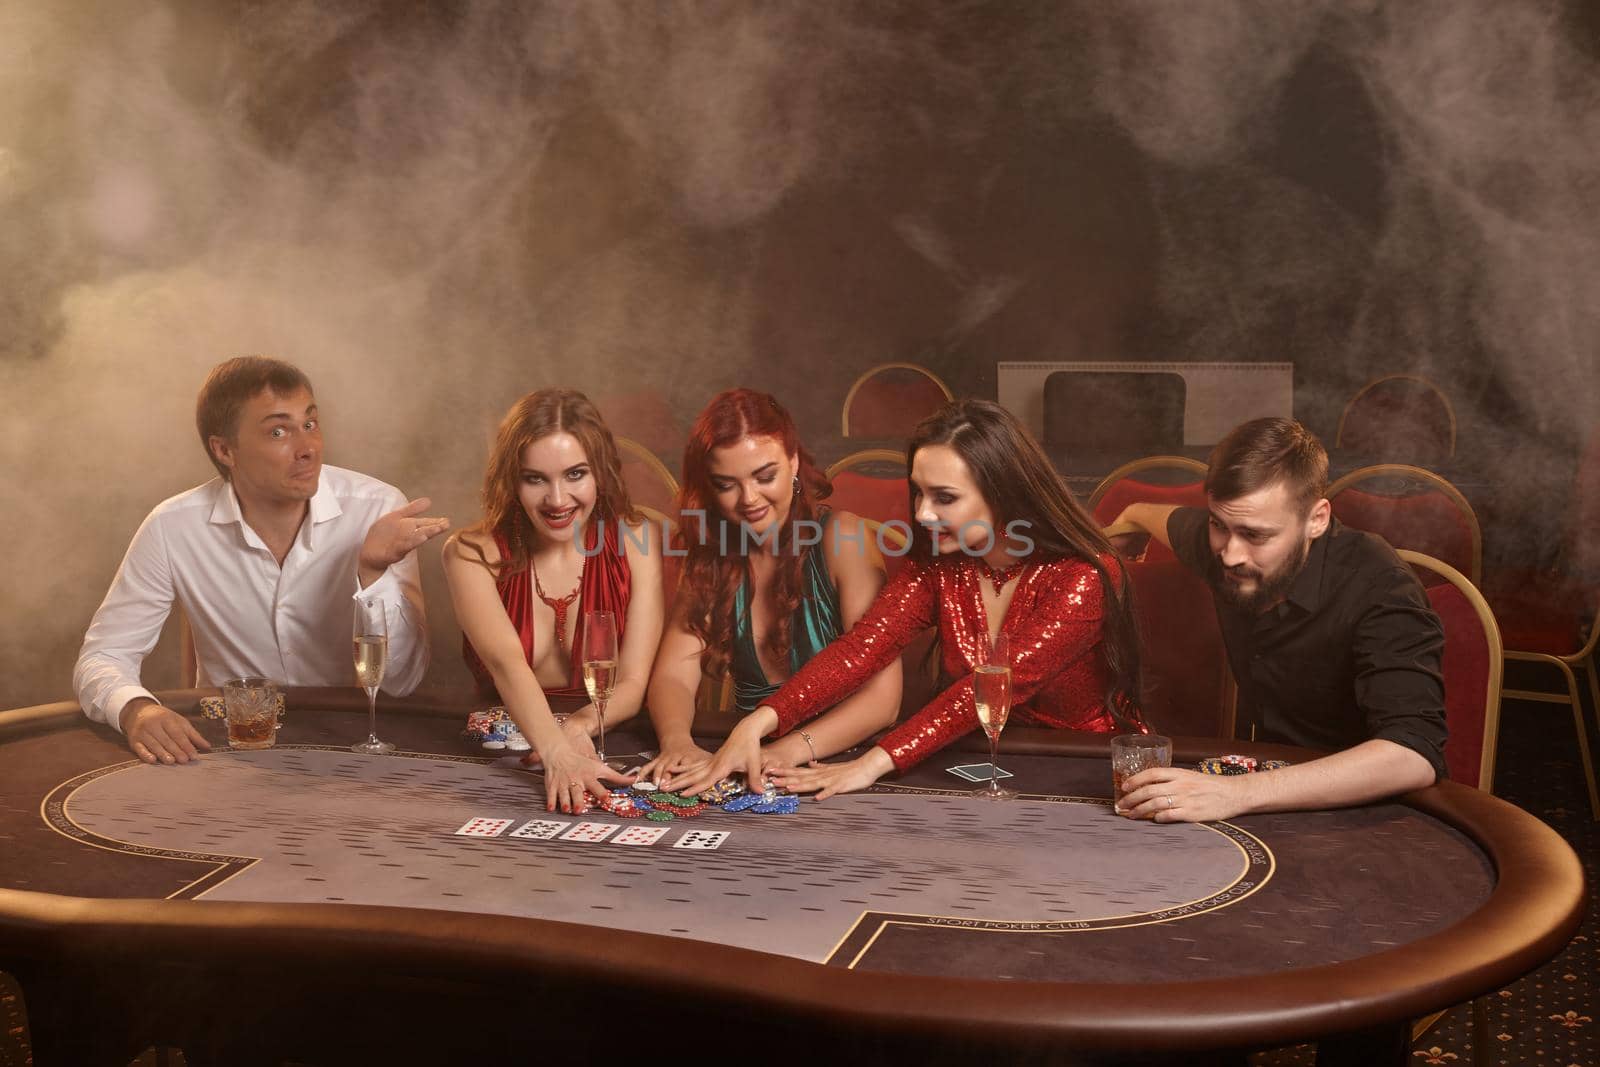 Wealthy friends are playing poker at casino. They are celebrating their win, smiling and looking vey excited while posing at the table against a dark smoke background. Cards, chips, money, alcohol, gambling, entertainment concept.